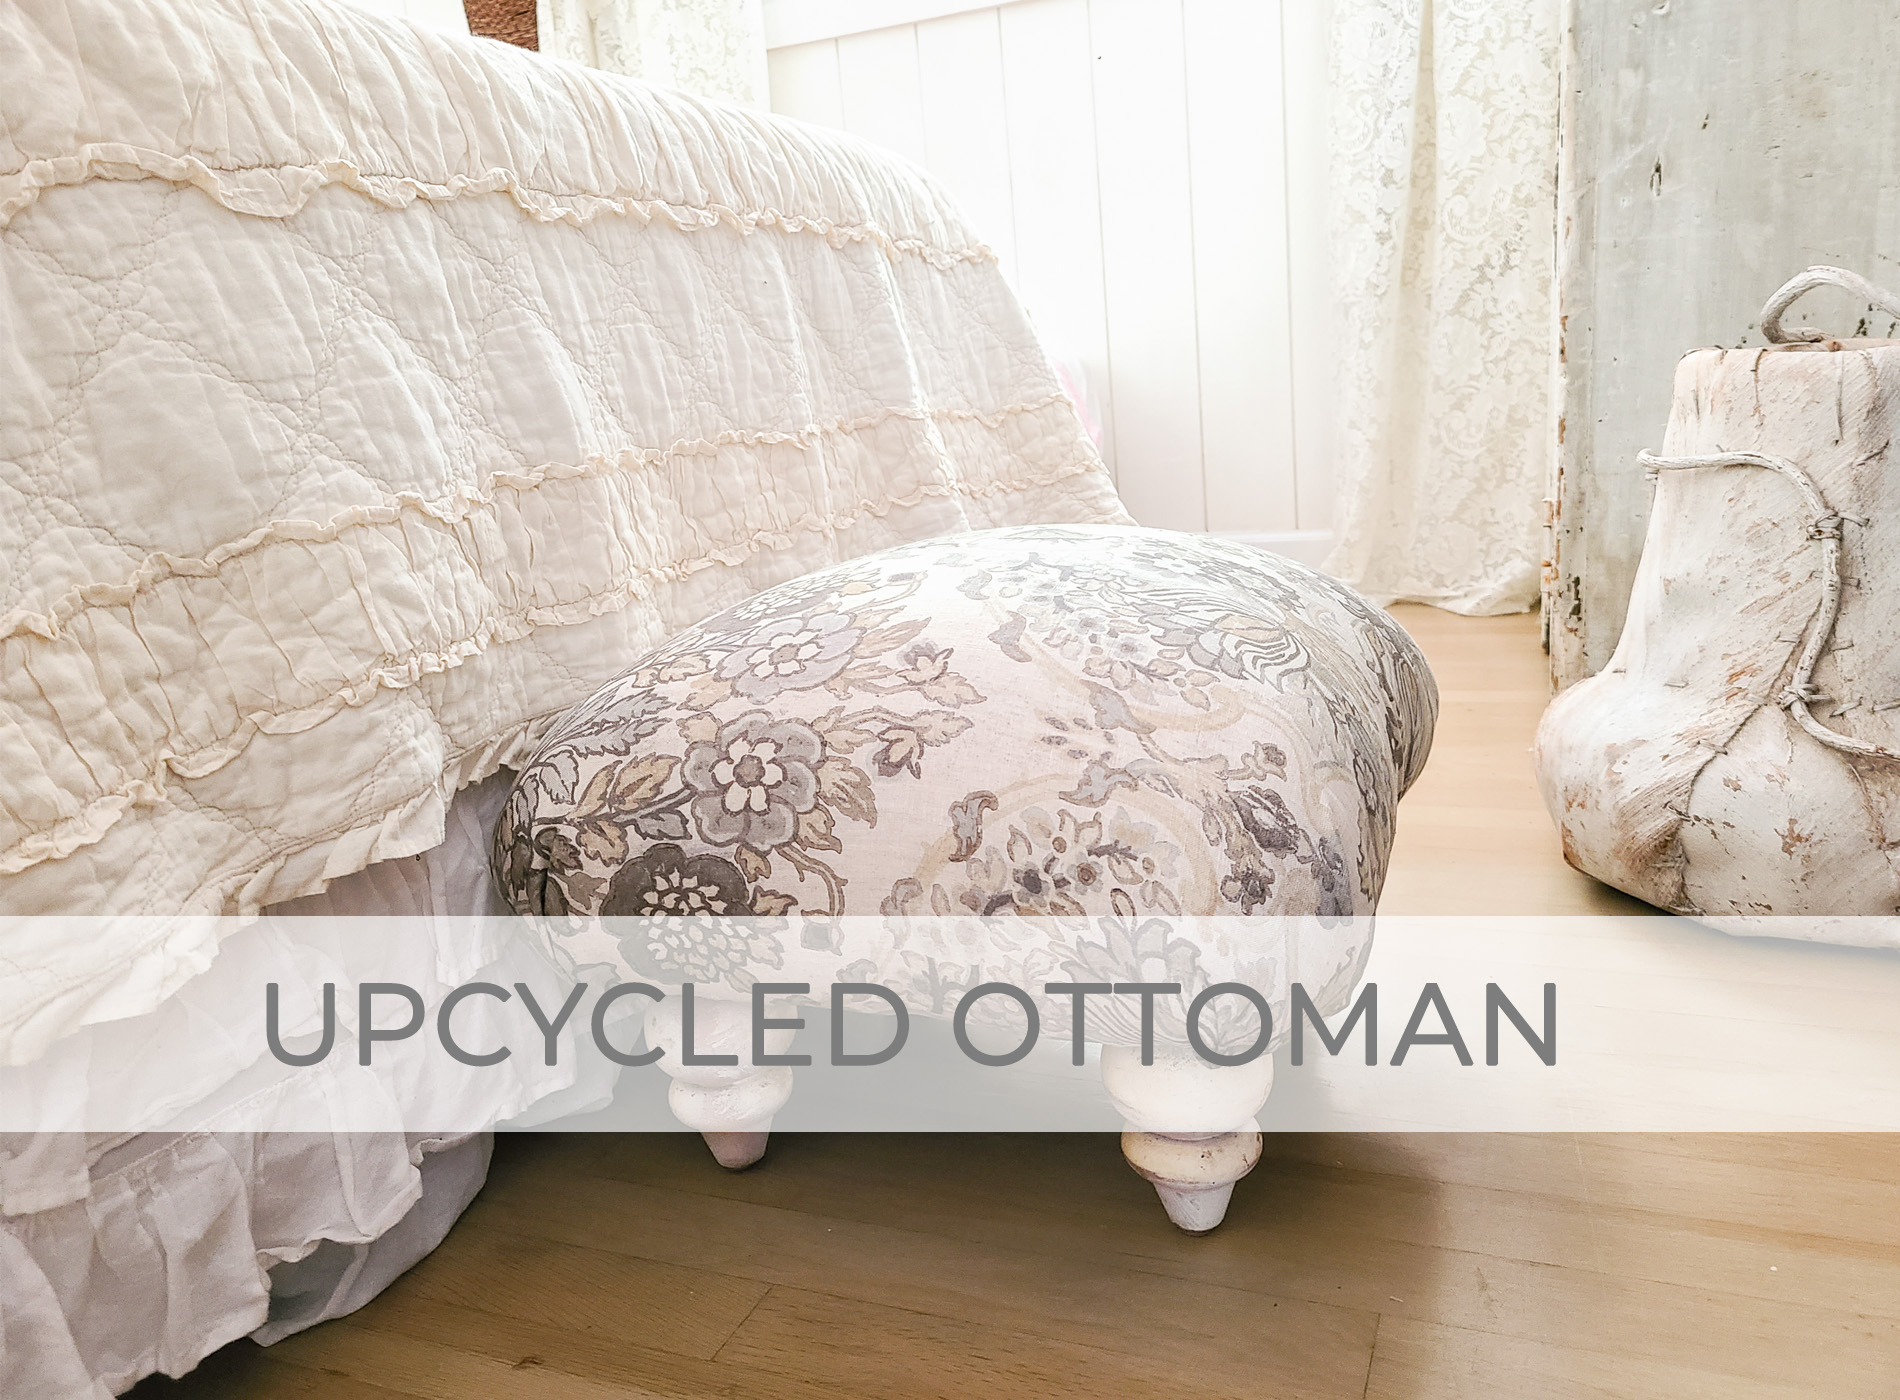 Upcycled Ottoman Build by Larissa of Prodigal Pieces | prodigalpieces.com #prodigalpieces